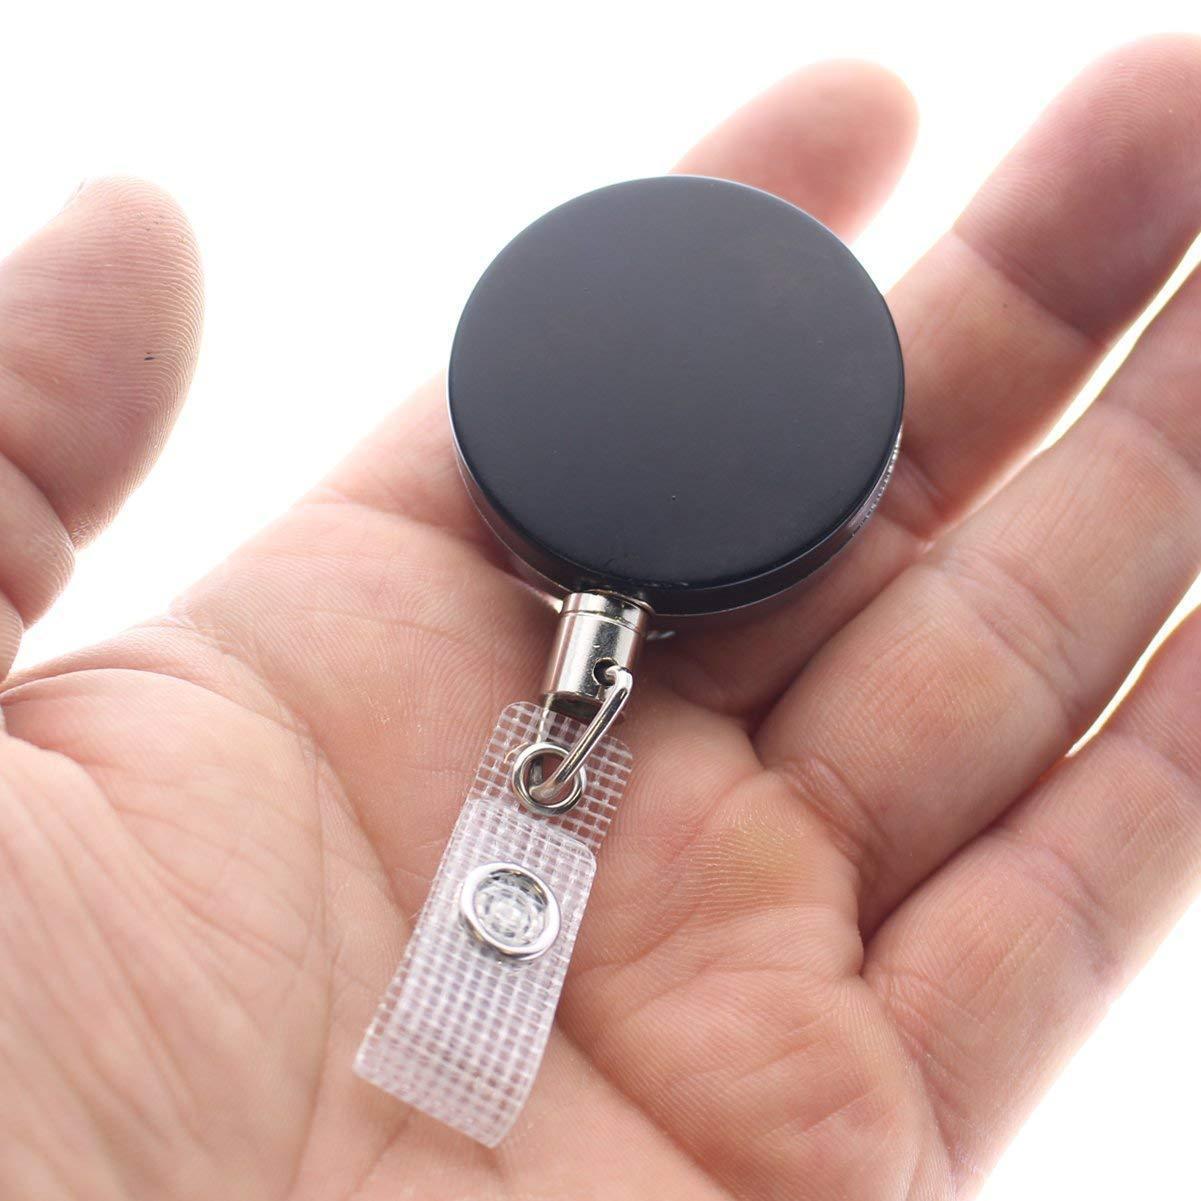 A hand holding an Heavy Duty Badge Reel With Steel Cable 2120-3305, featuring a black round retractable design with a clear plastic strap and metal snap button.